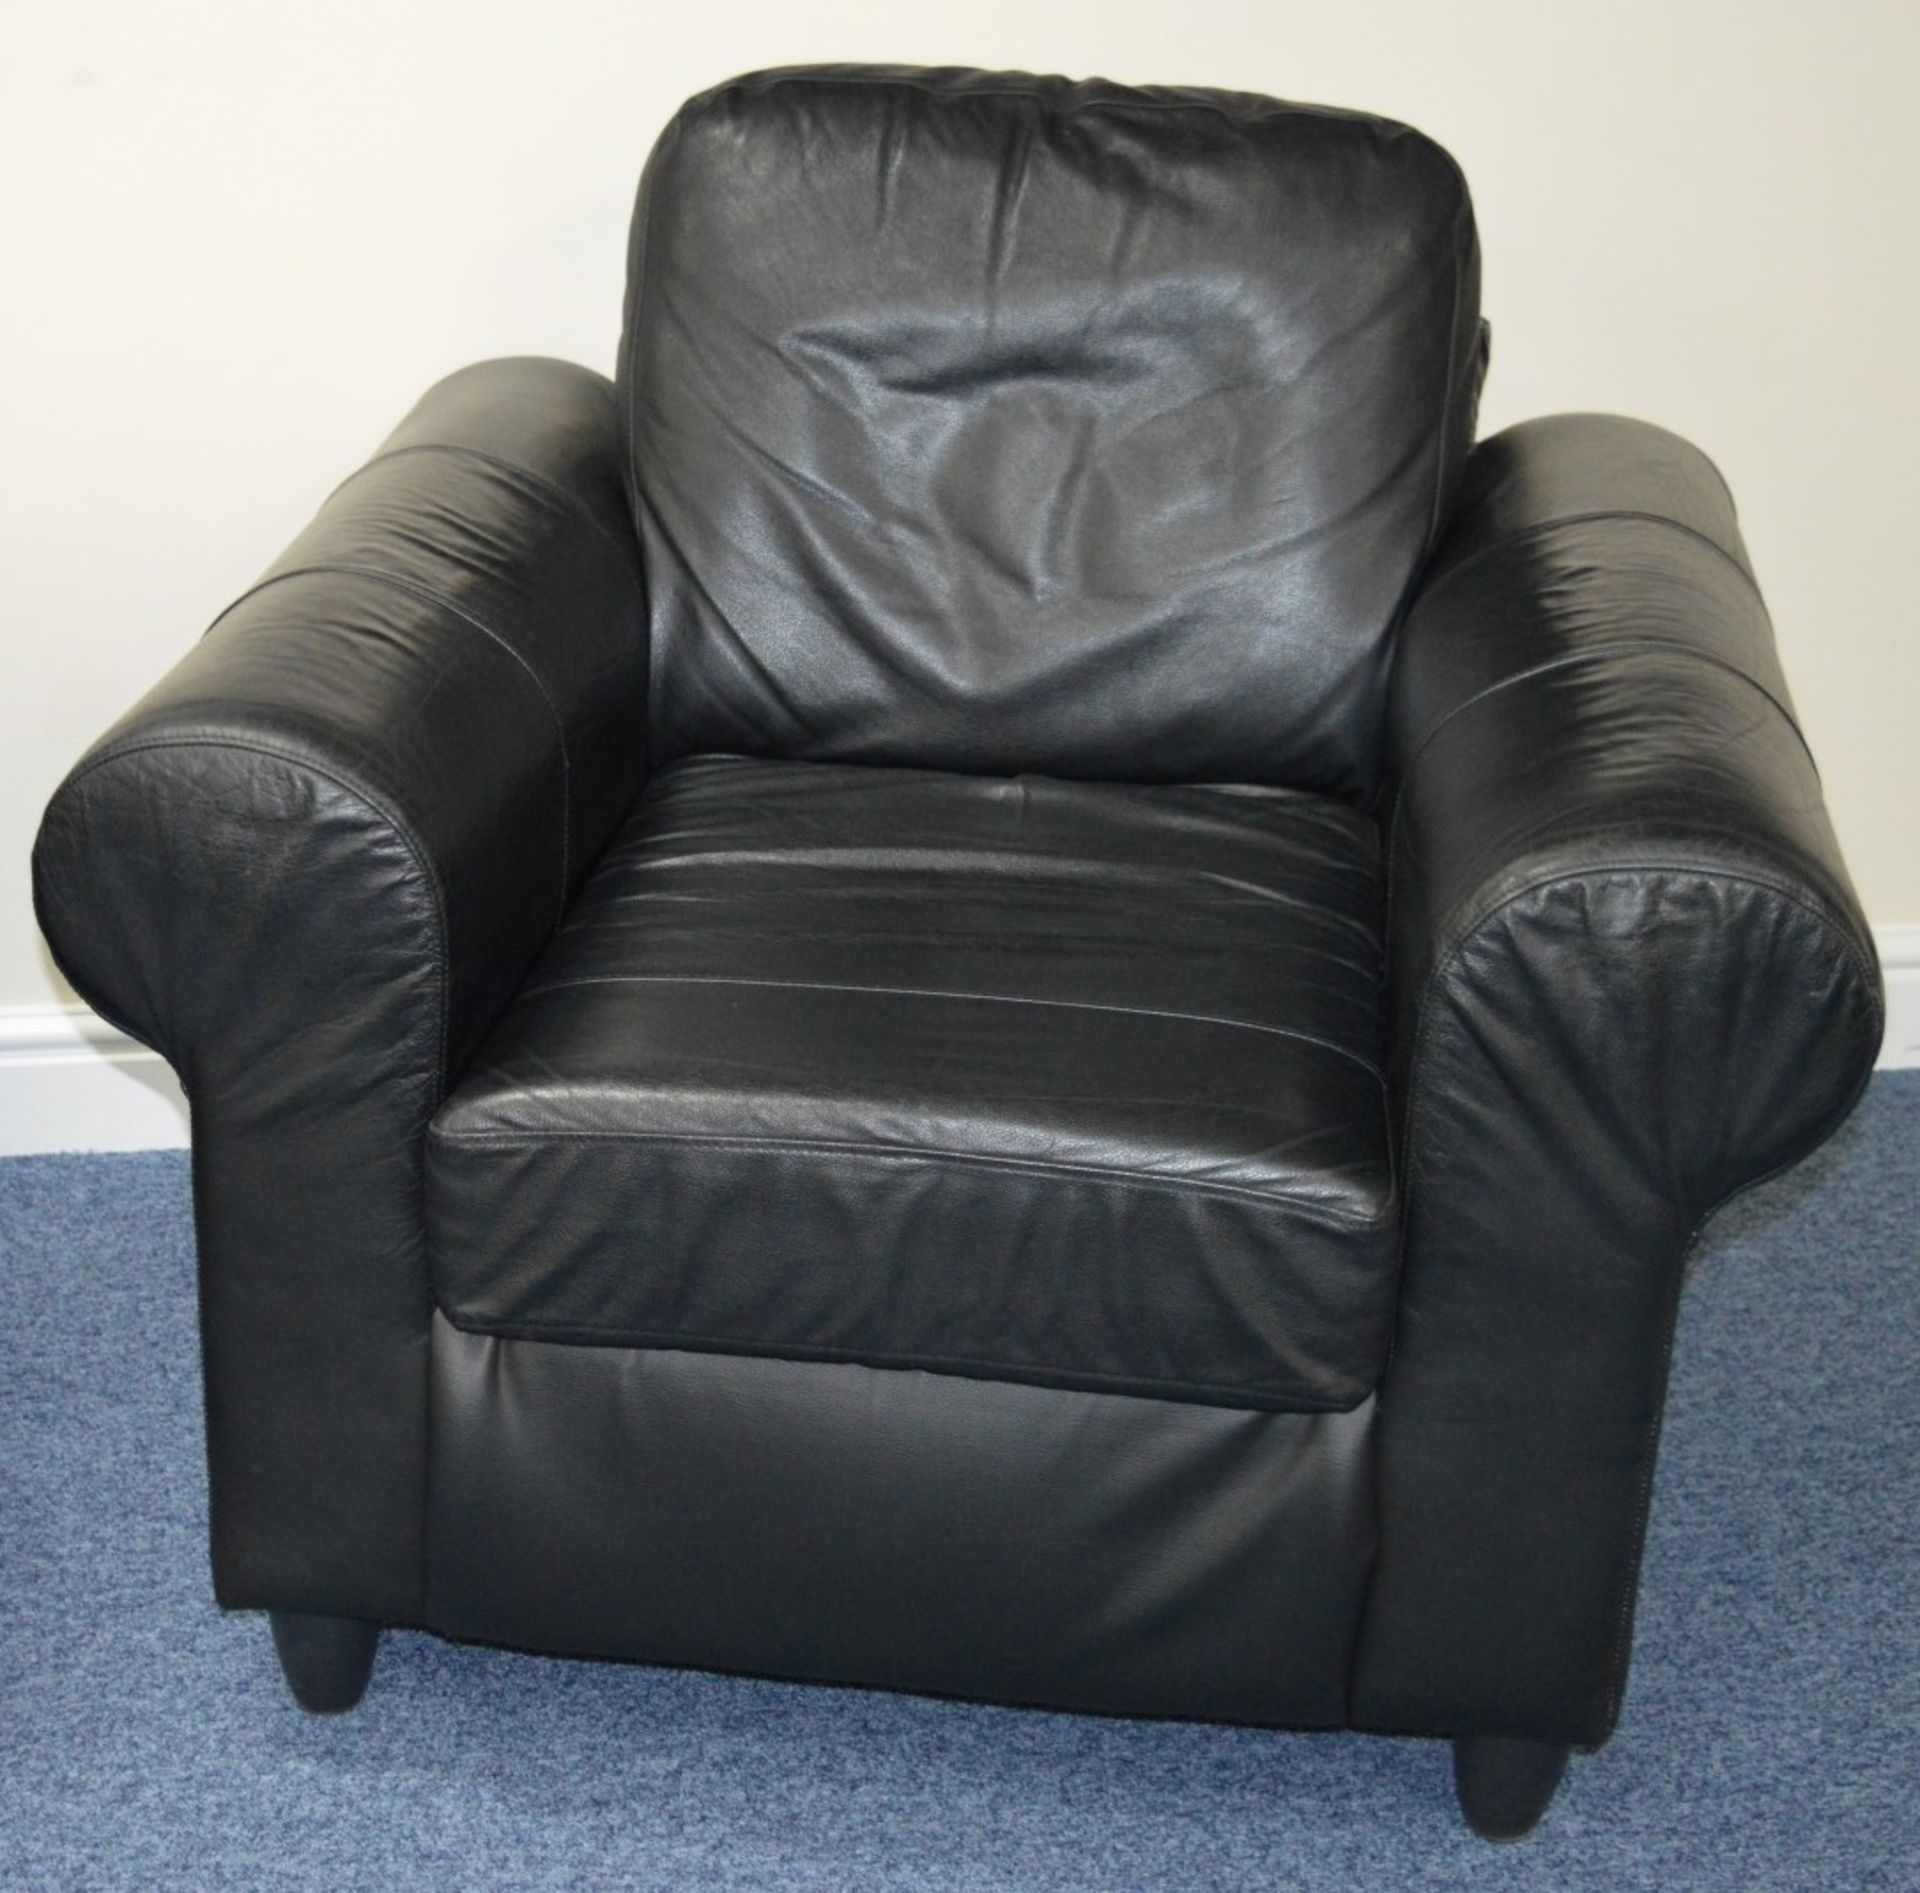 2 x Black Leather Armchairs - Contemporary Voluptuous Chairs in Black Leather - H85 x W94 x D86 - Image 3 of 5